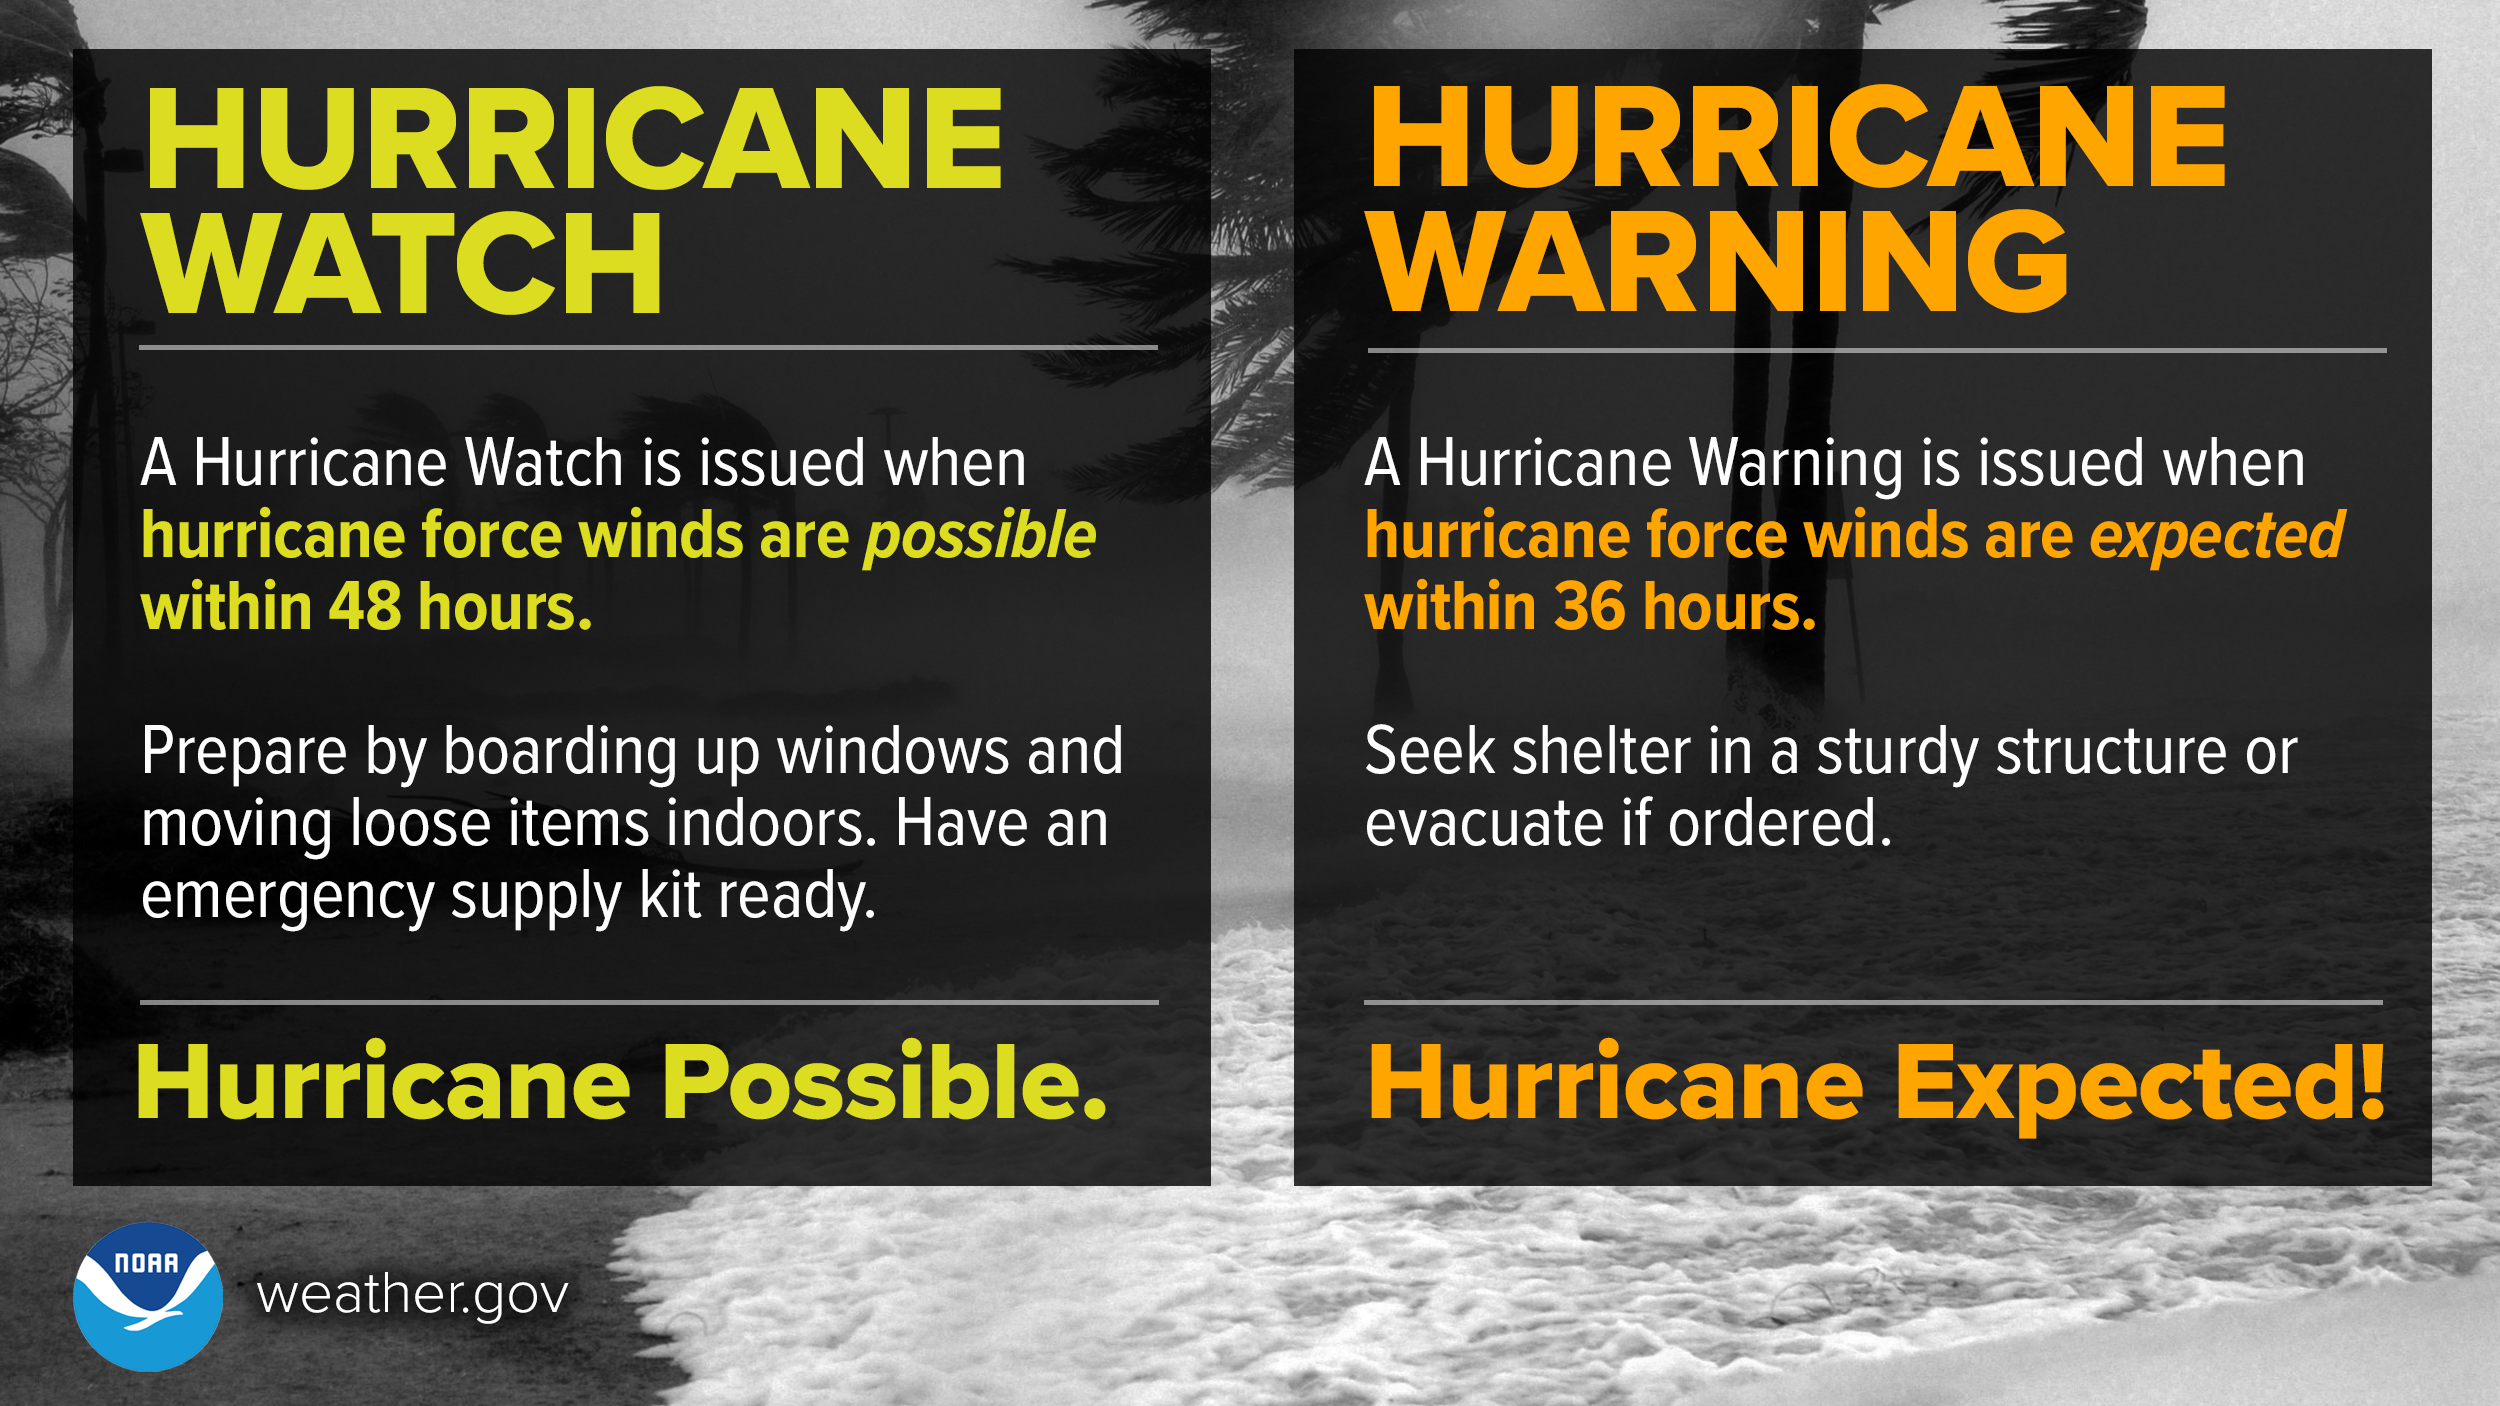 A Hurricane Watch is issued when hurricane force winds are possible within 48 hours. Prepare your home by boarding up windows and moving loose items indoors. Have an emergency supply kit ready. A Hurricane Warning is issued when hurricane force winds are expected within 36 hours. Seek shelter in a sturdy structure or evacuate if ordered.